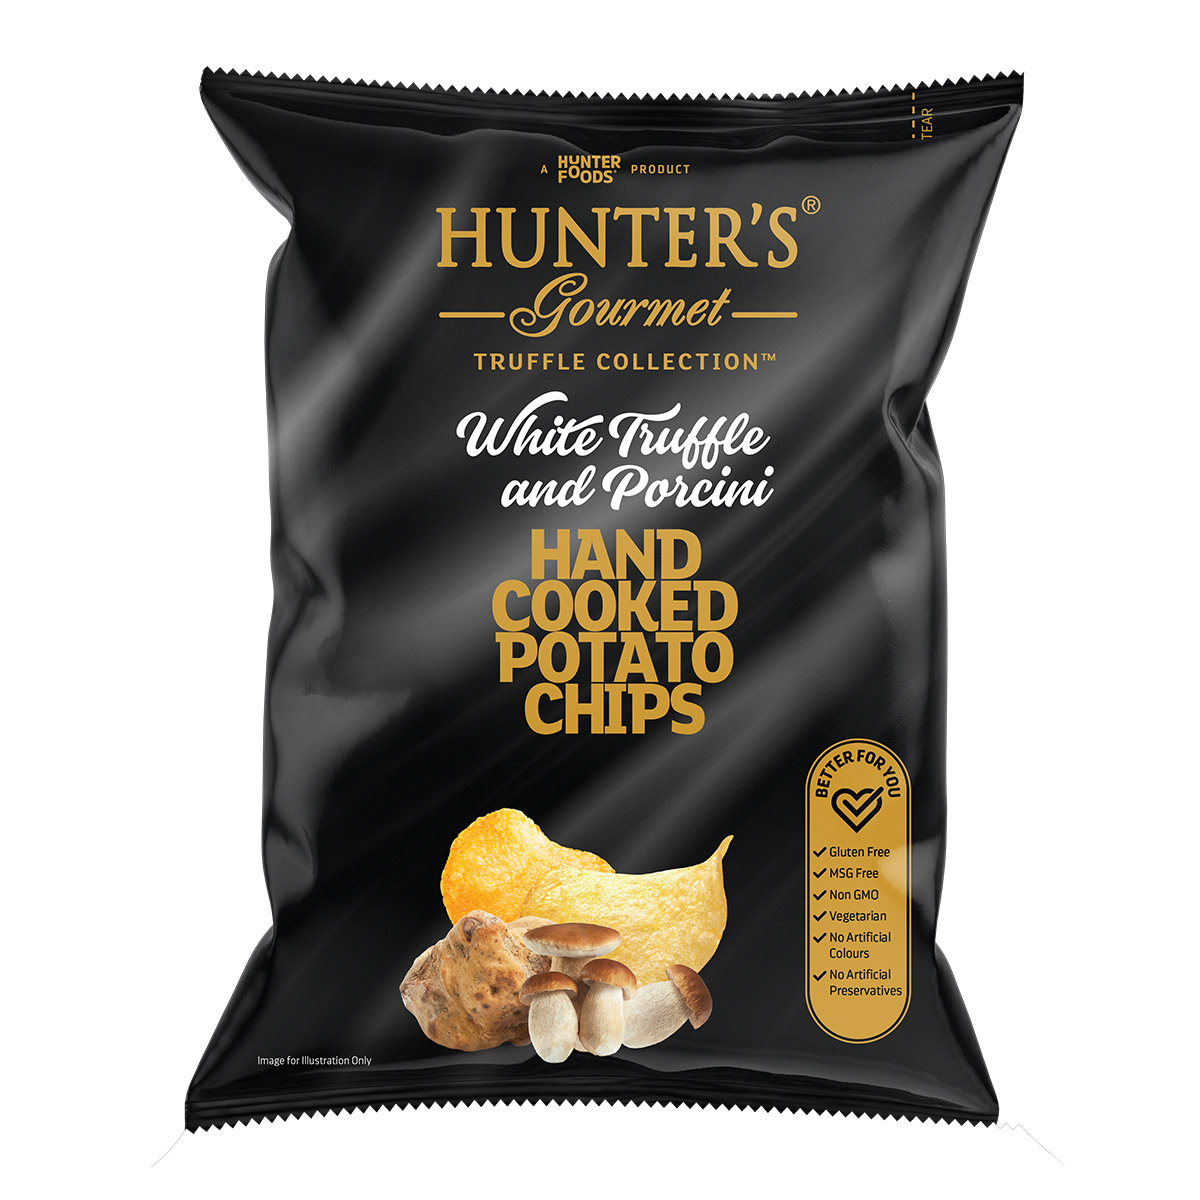 Hunter’s Gourmet Hand Cooked Potato Chips – SmokehouseBarbecue – Gold Edition (125gm)